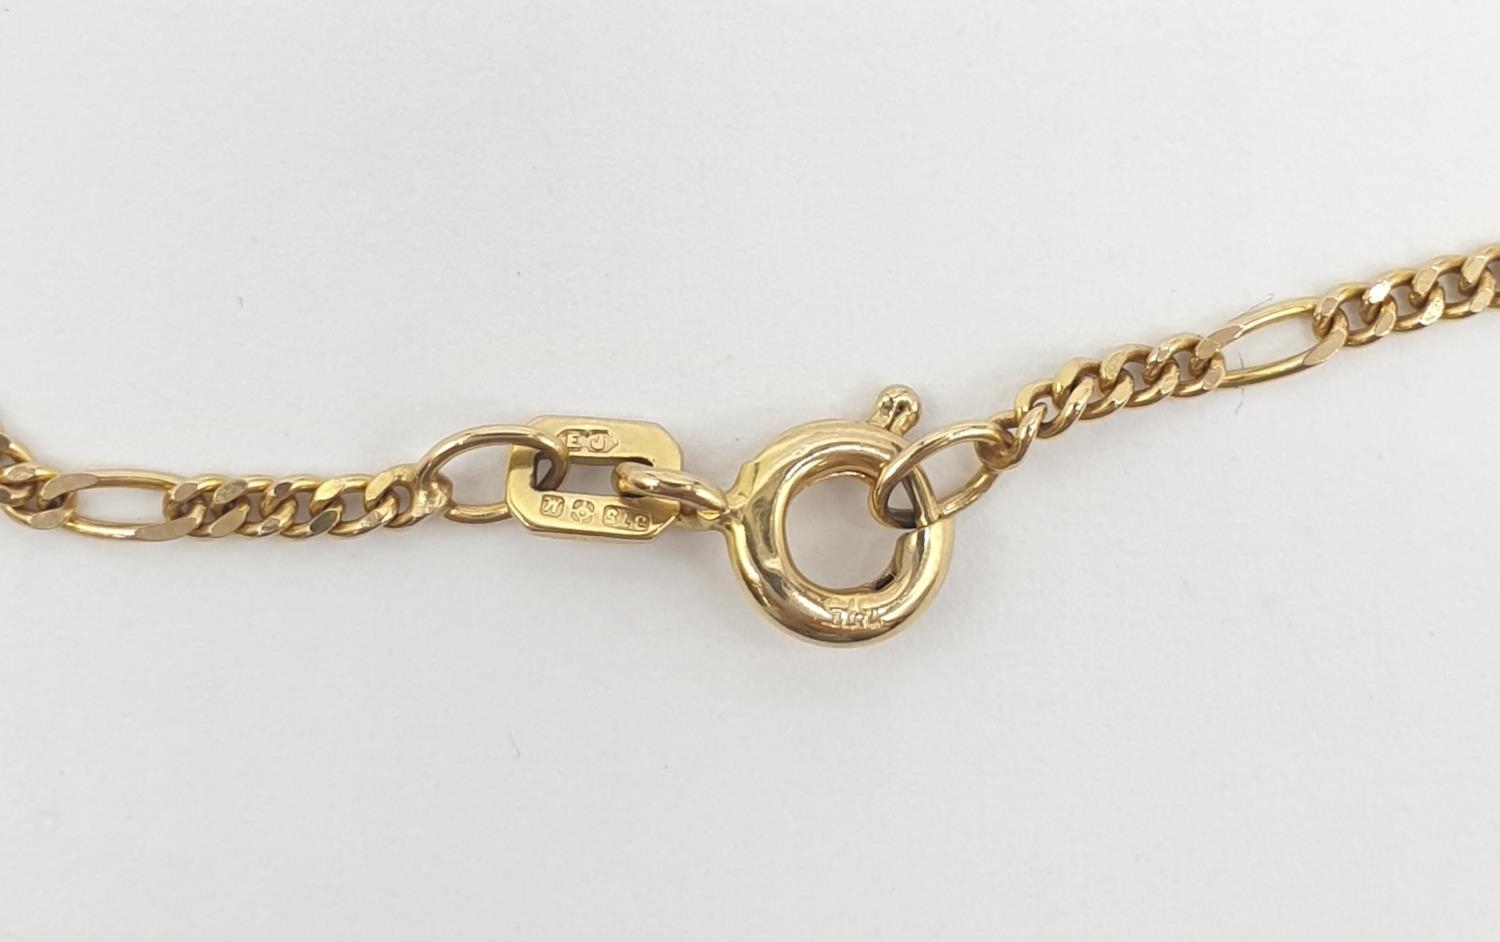 40cm 9ct gold neck chain weight 3gm. - Image 3 of 3